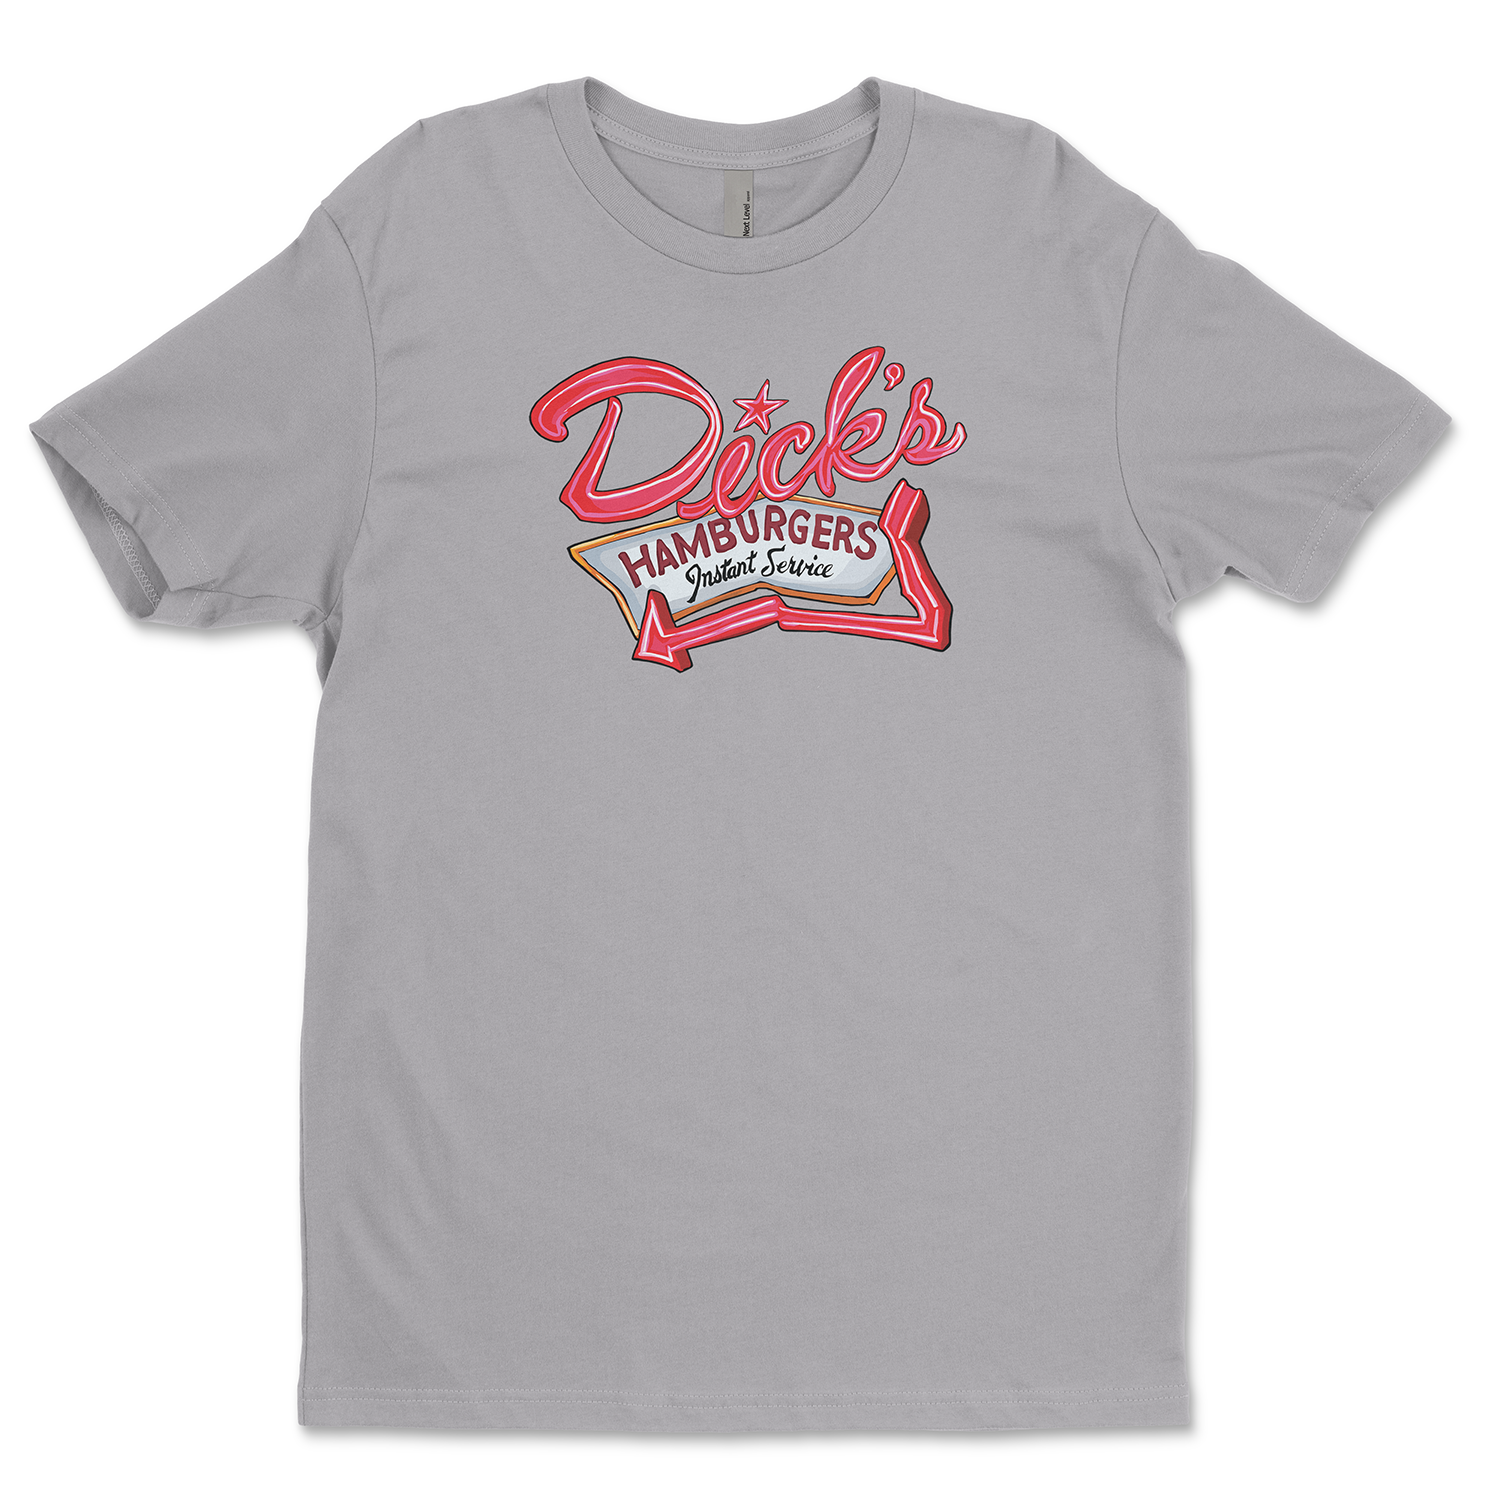 "Dick's Drive-In" Unisex T-Shirt